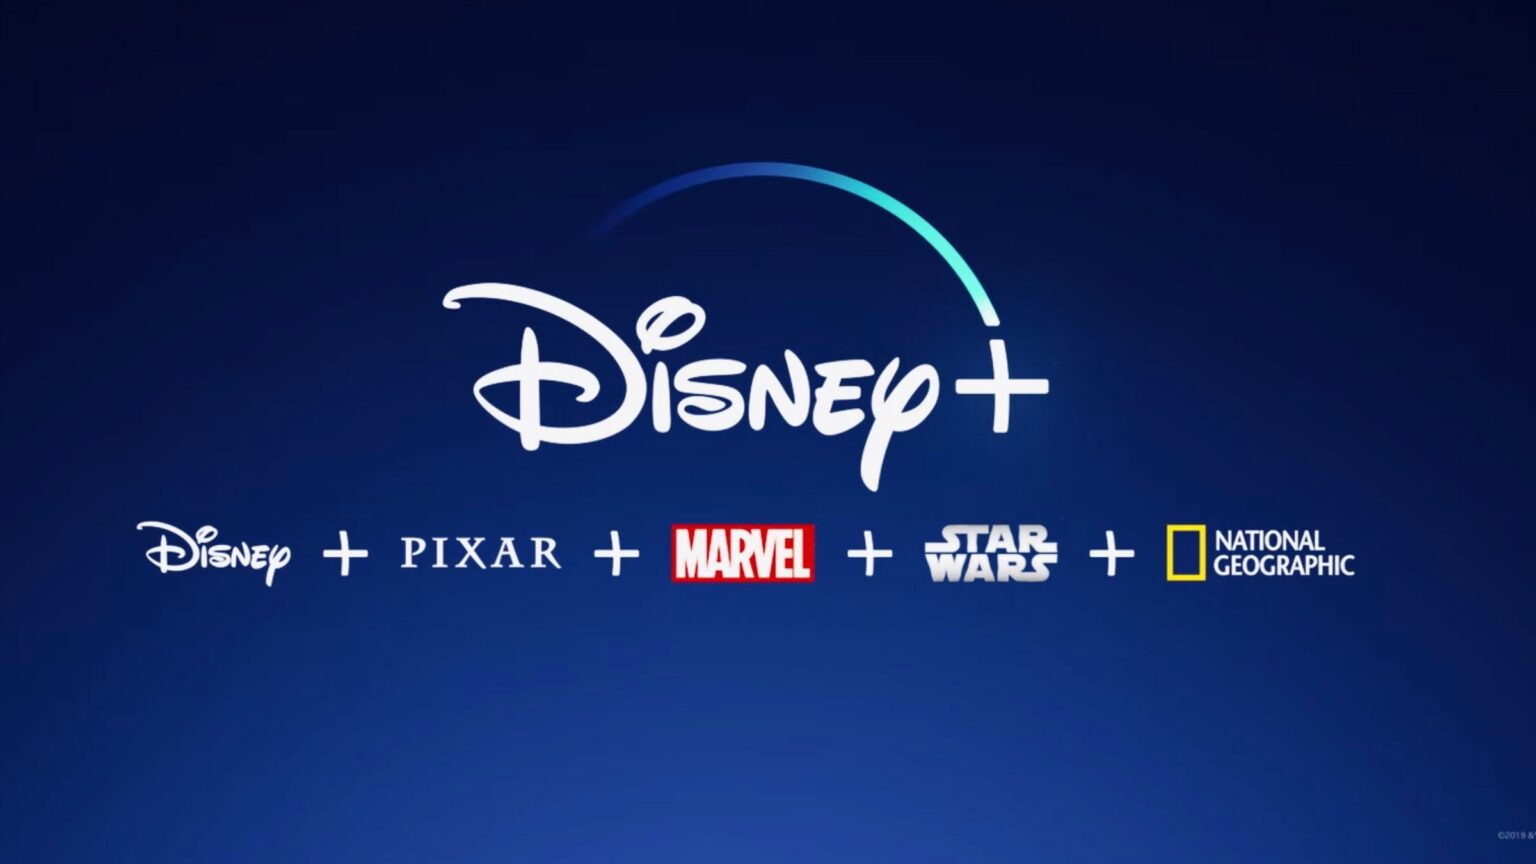 Are you a big Disney fan? Here's some great ways to get Disney Plus free, before the free trials go away for good.